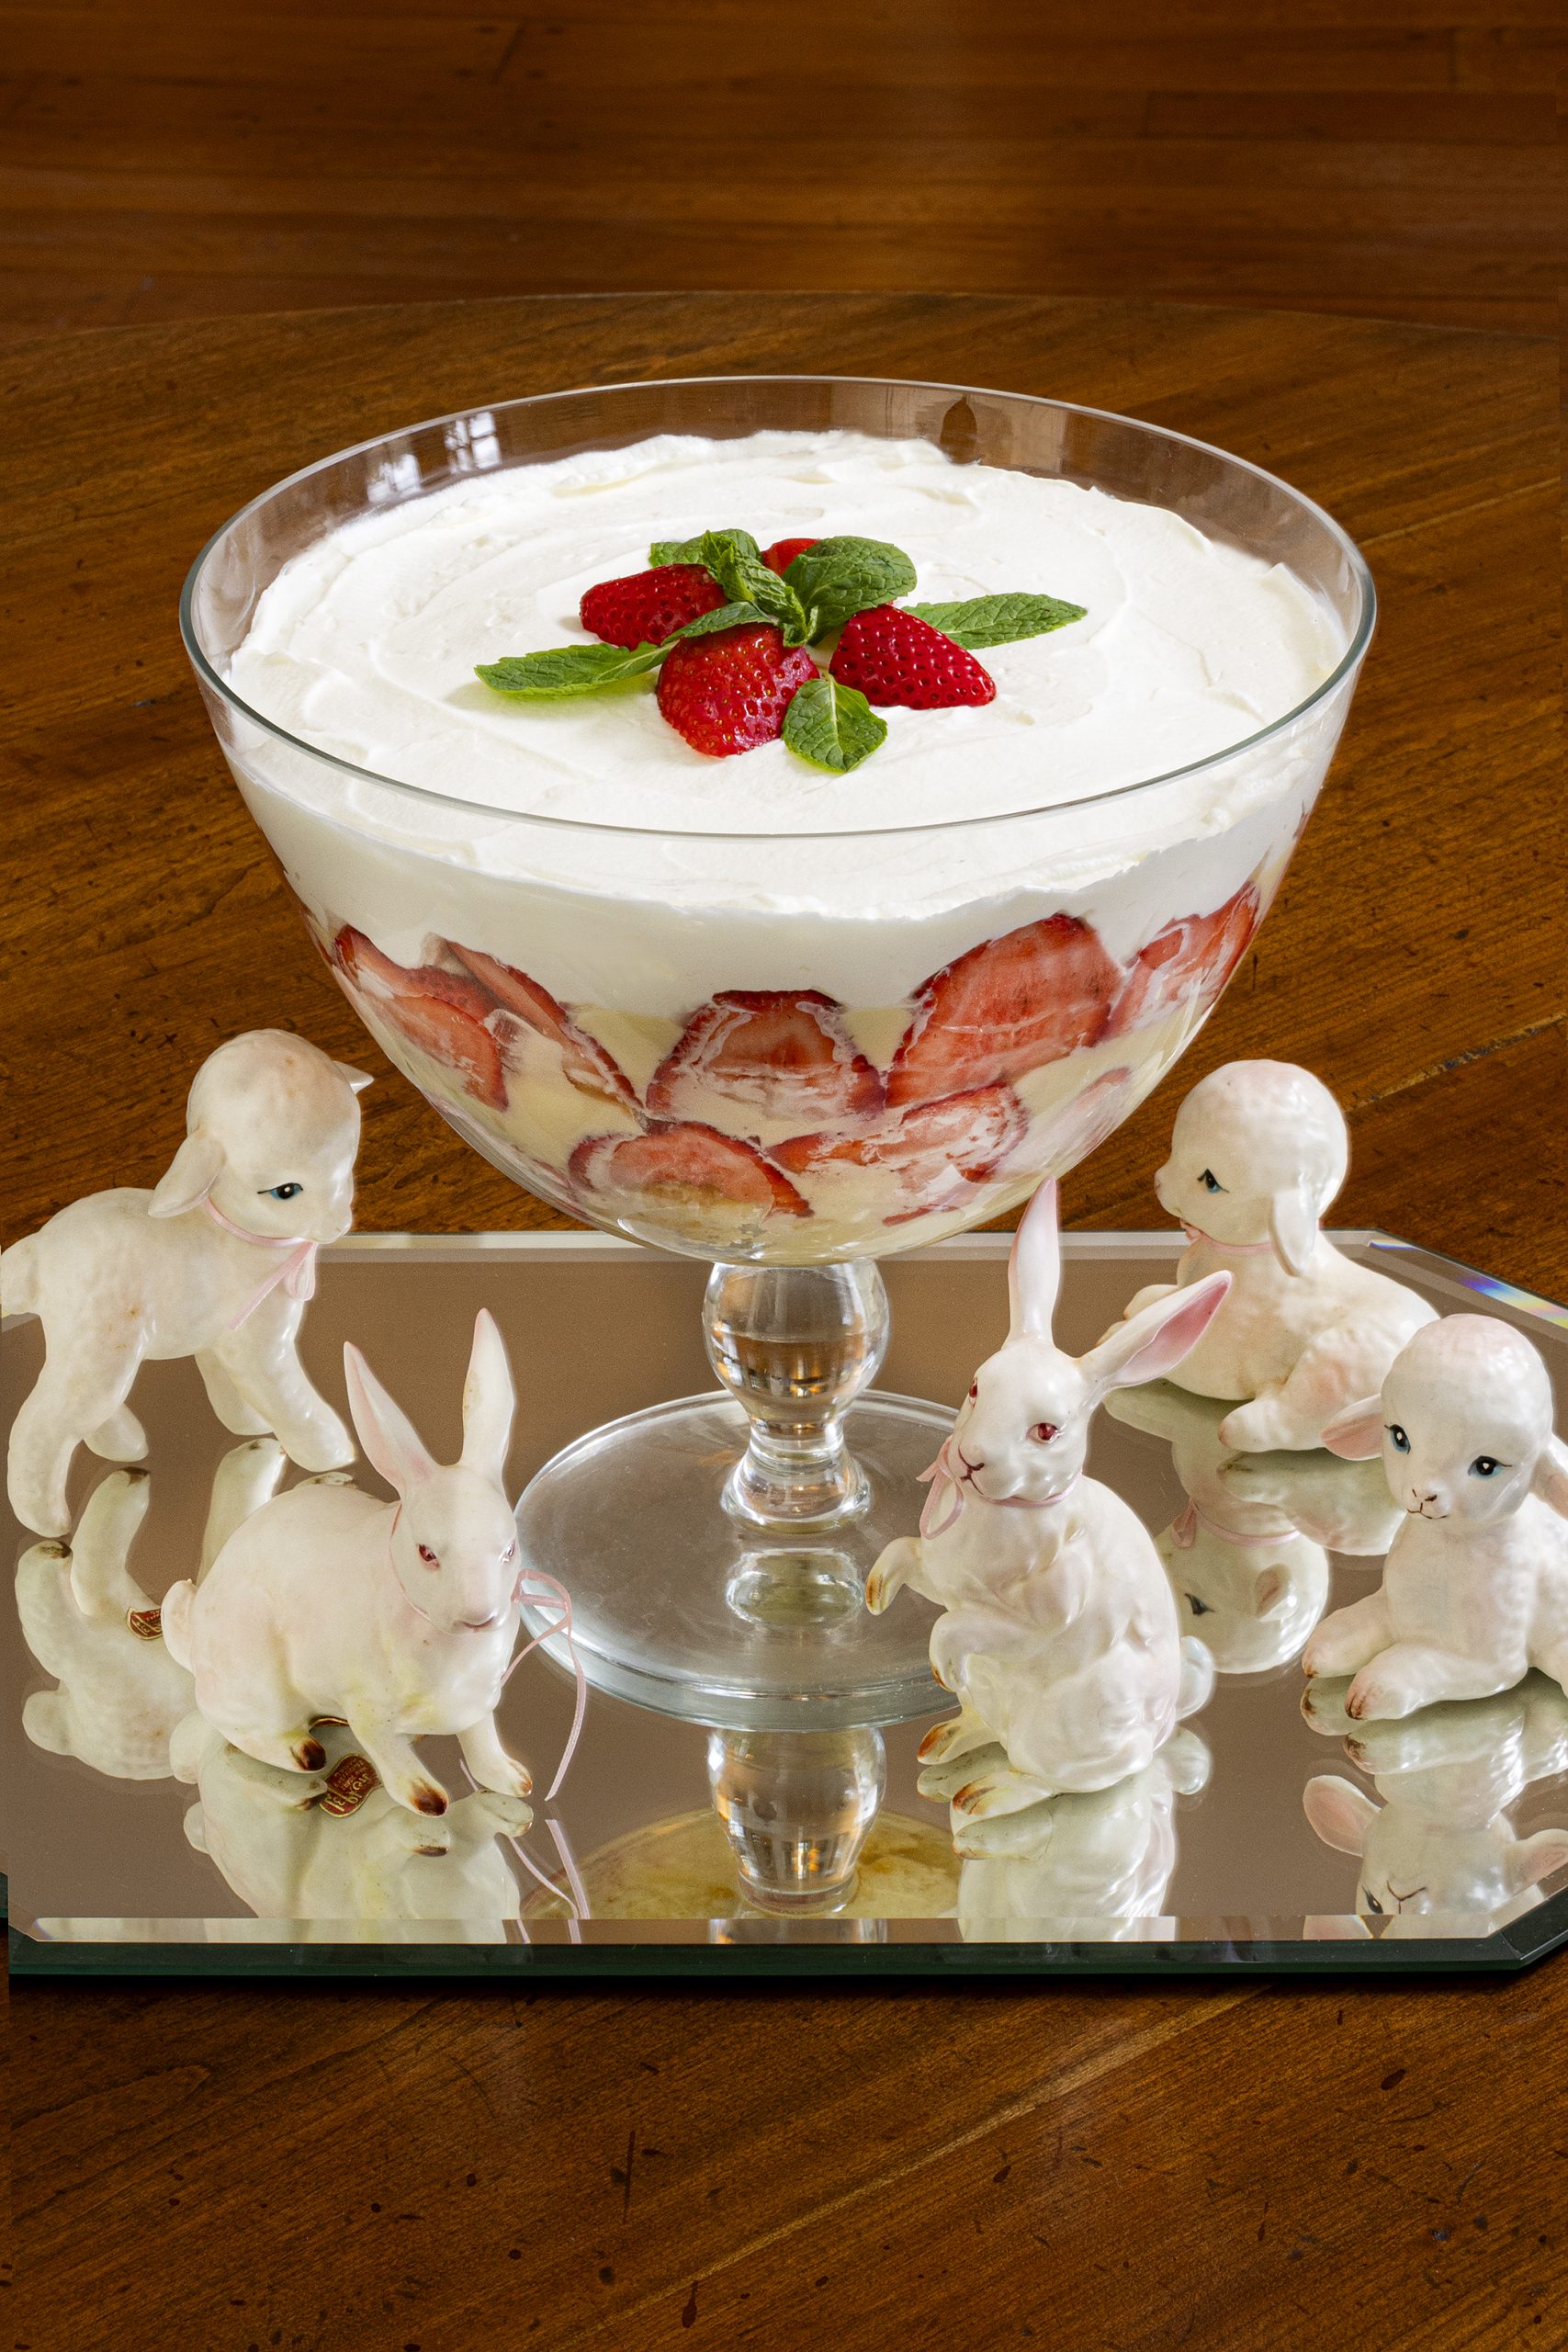 Aimee and Elizabeth’s mother, Mary Anne DuBose, inspired in her four daughters a love for making desserts. Her custard recipe takes center stage in Elizabeth’s strawberry trifle, with layers of pound cake, strawberries, and whipping cream. 